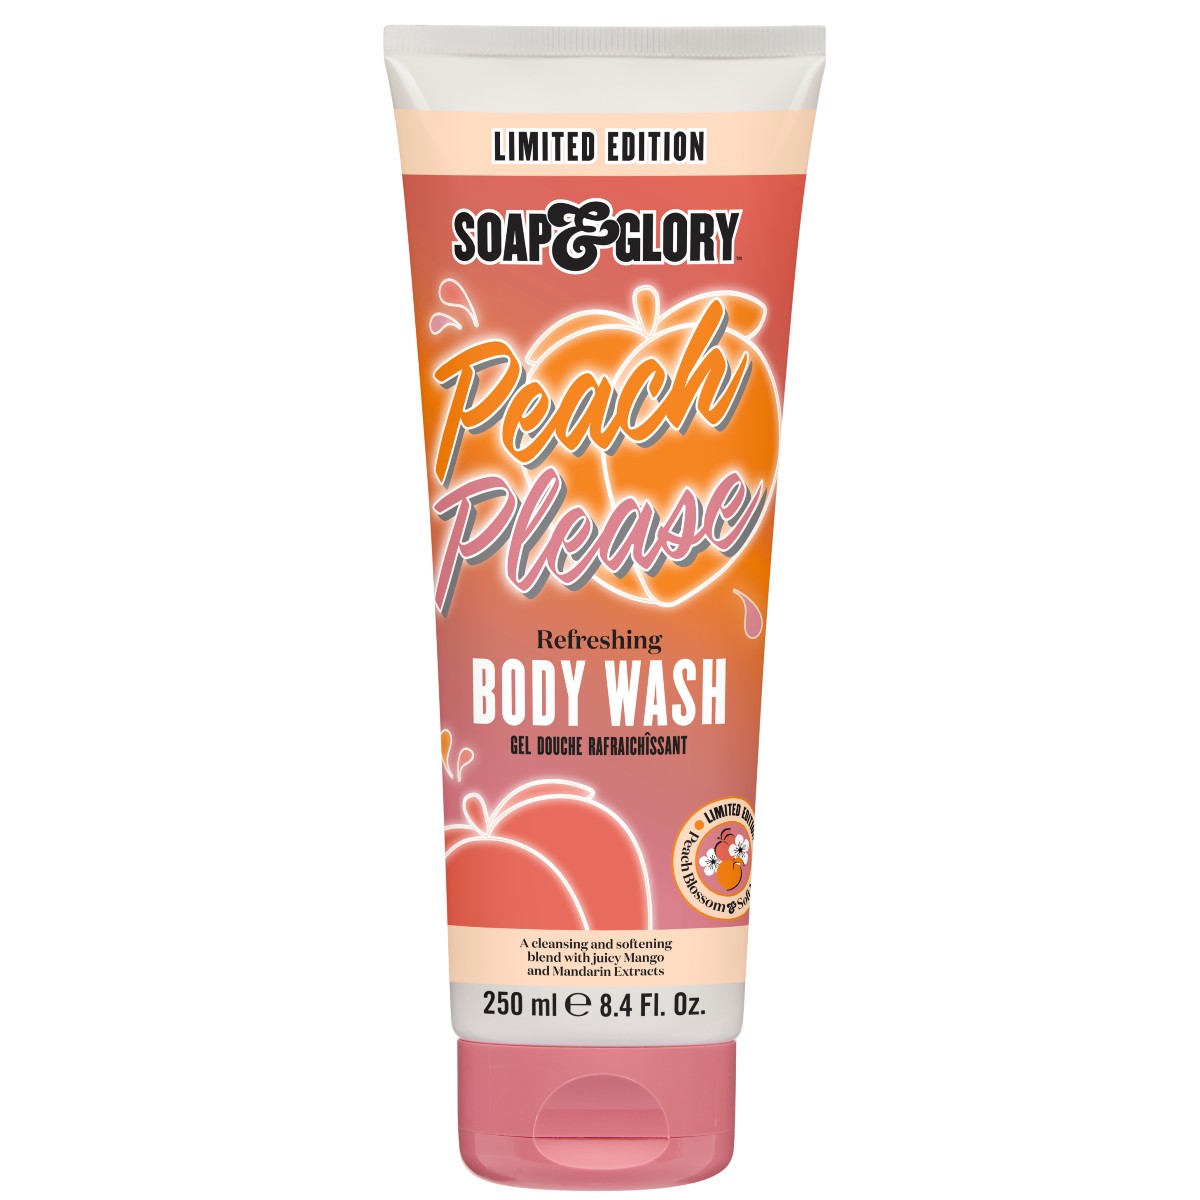 The Soap & Glory Peach Please Body Wash is (nearly) good enough to eat